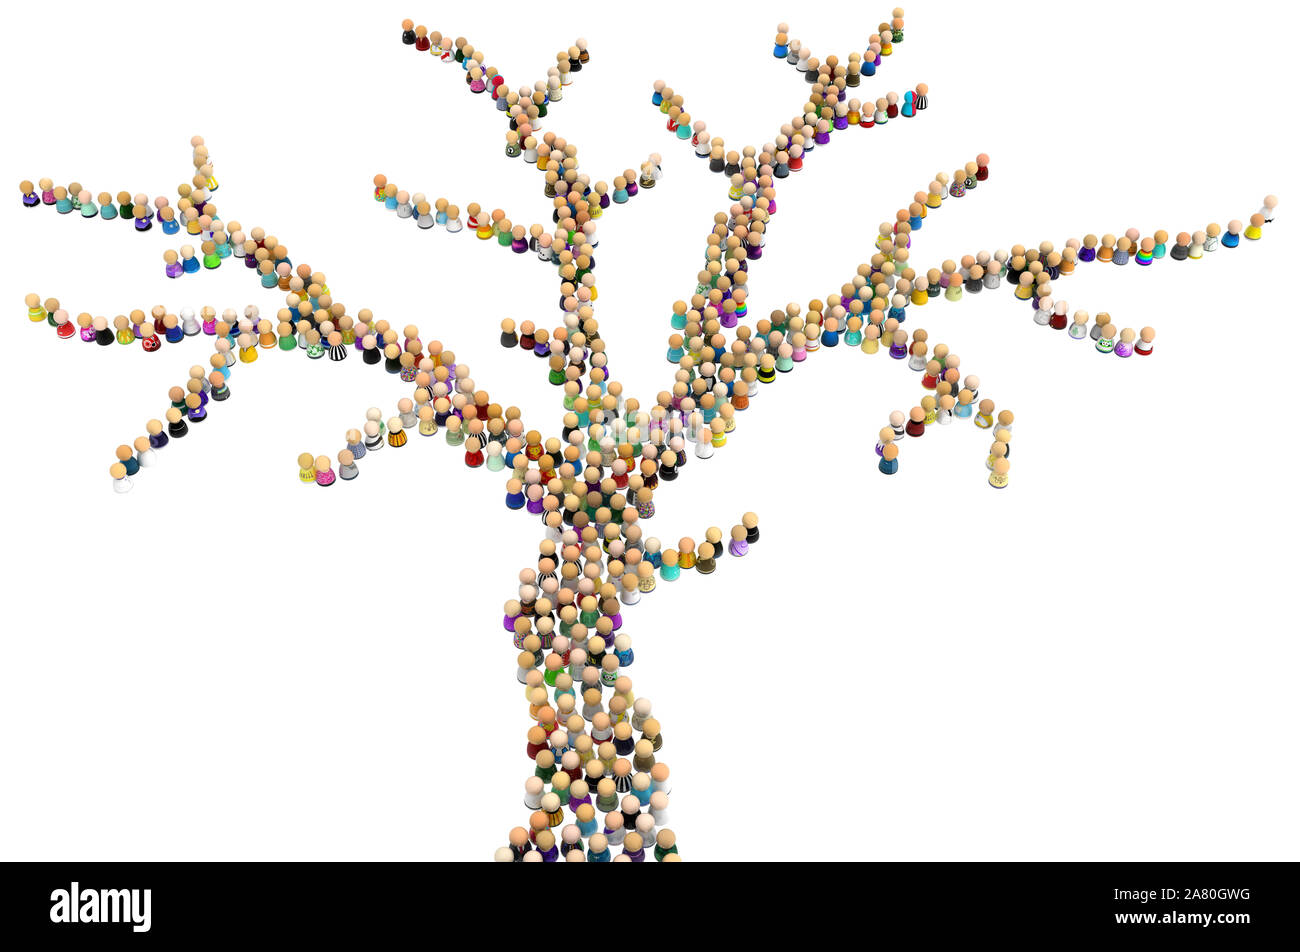 Crowd of small symbolic figures forming branching tree shape, 3d illustration, horizontal, isolated, over white Stock Photo